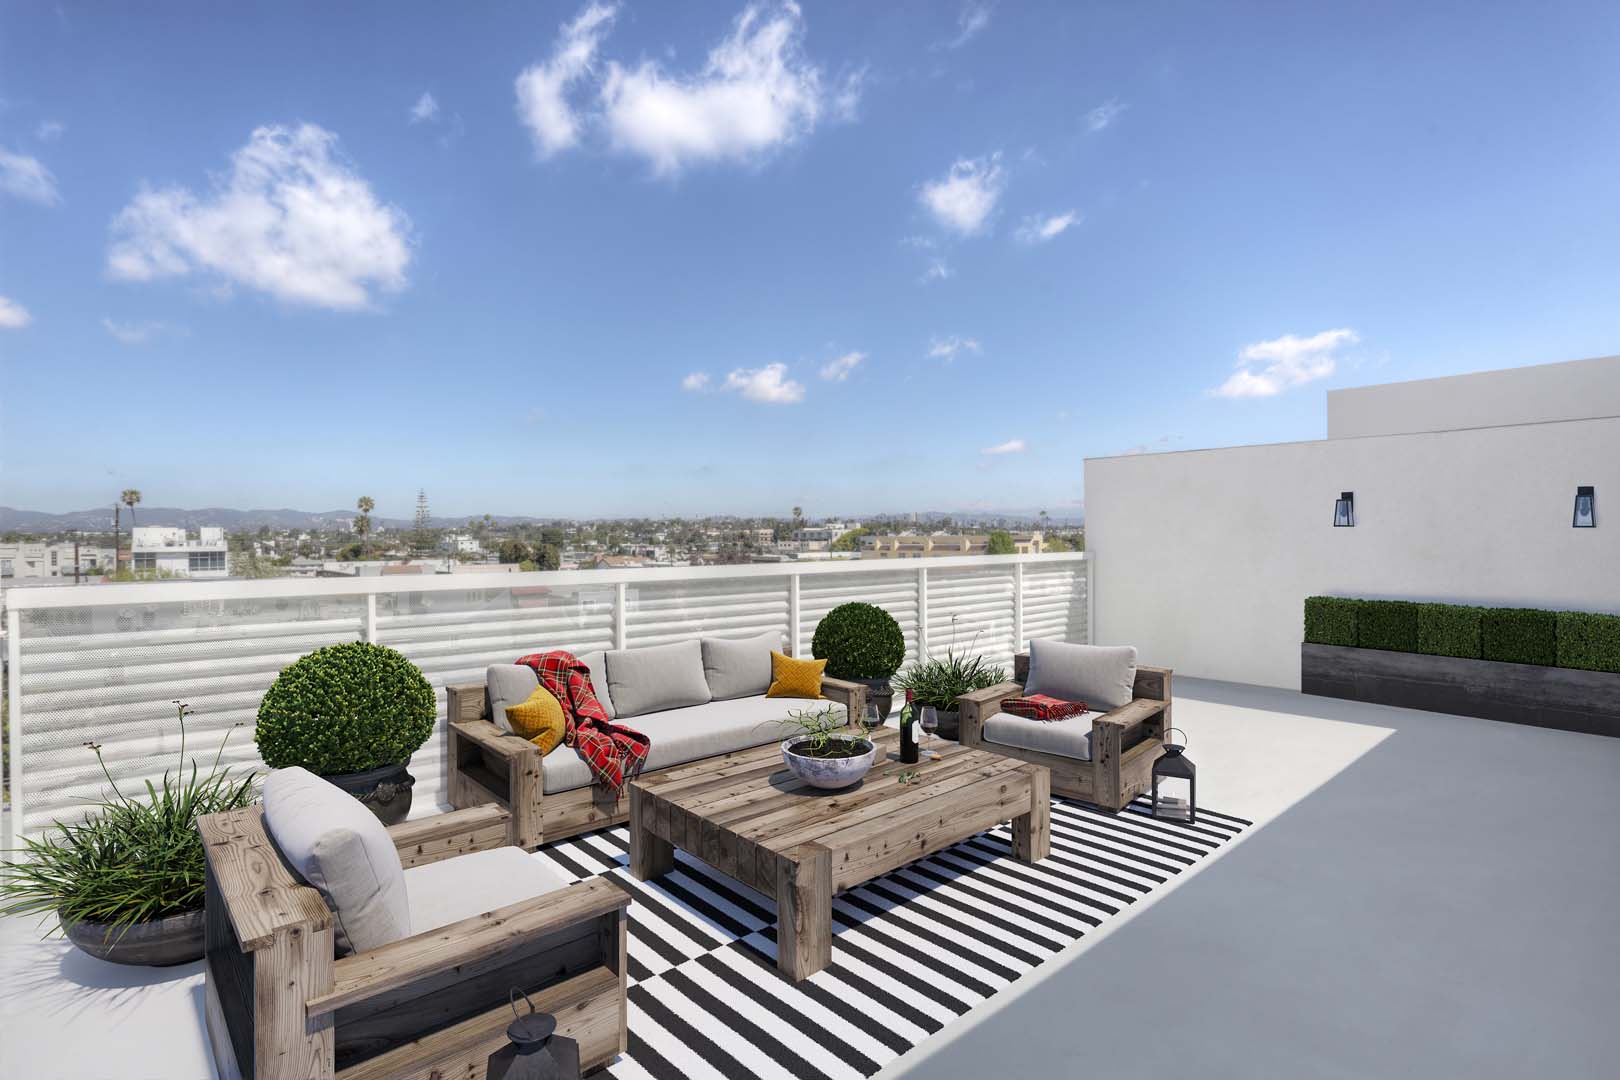 Apartments in Culver City CA - Spacious Rooftop Lounge with a Great City View